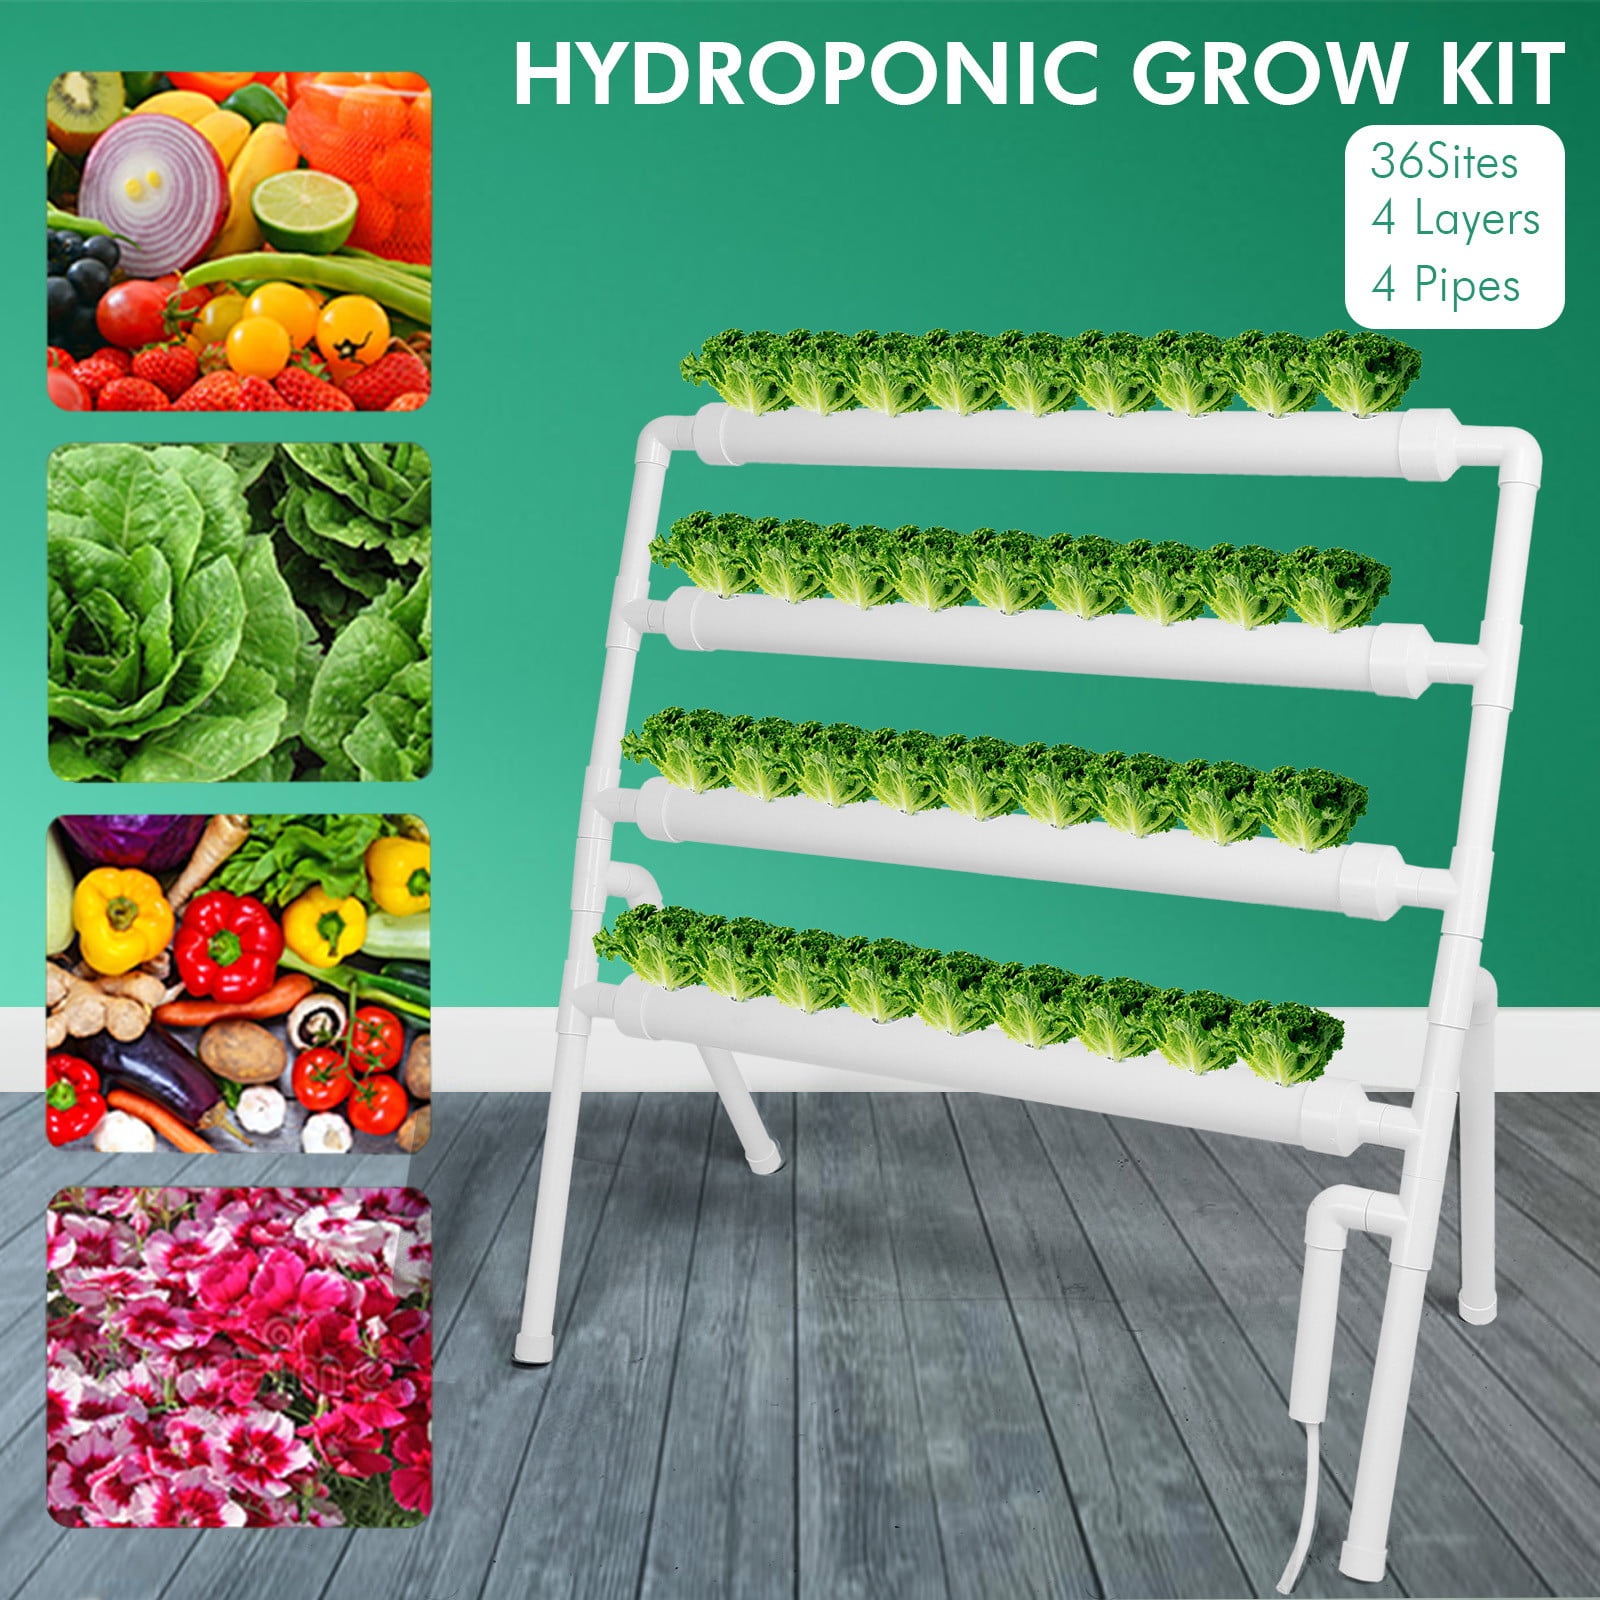 36 Site 4 Pipe Hydroponic Grow Kit Hydroponic Growing System for Leafy Vegetable 